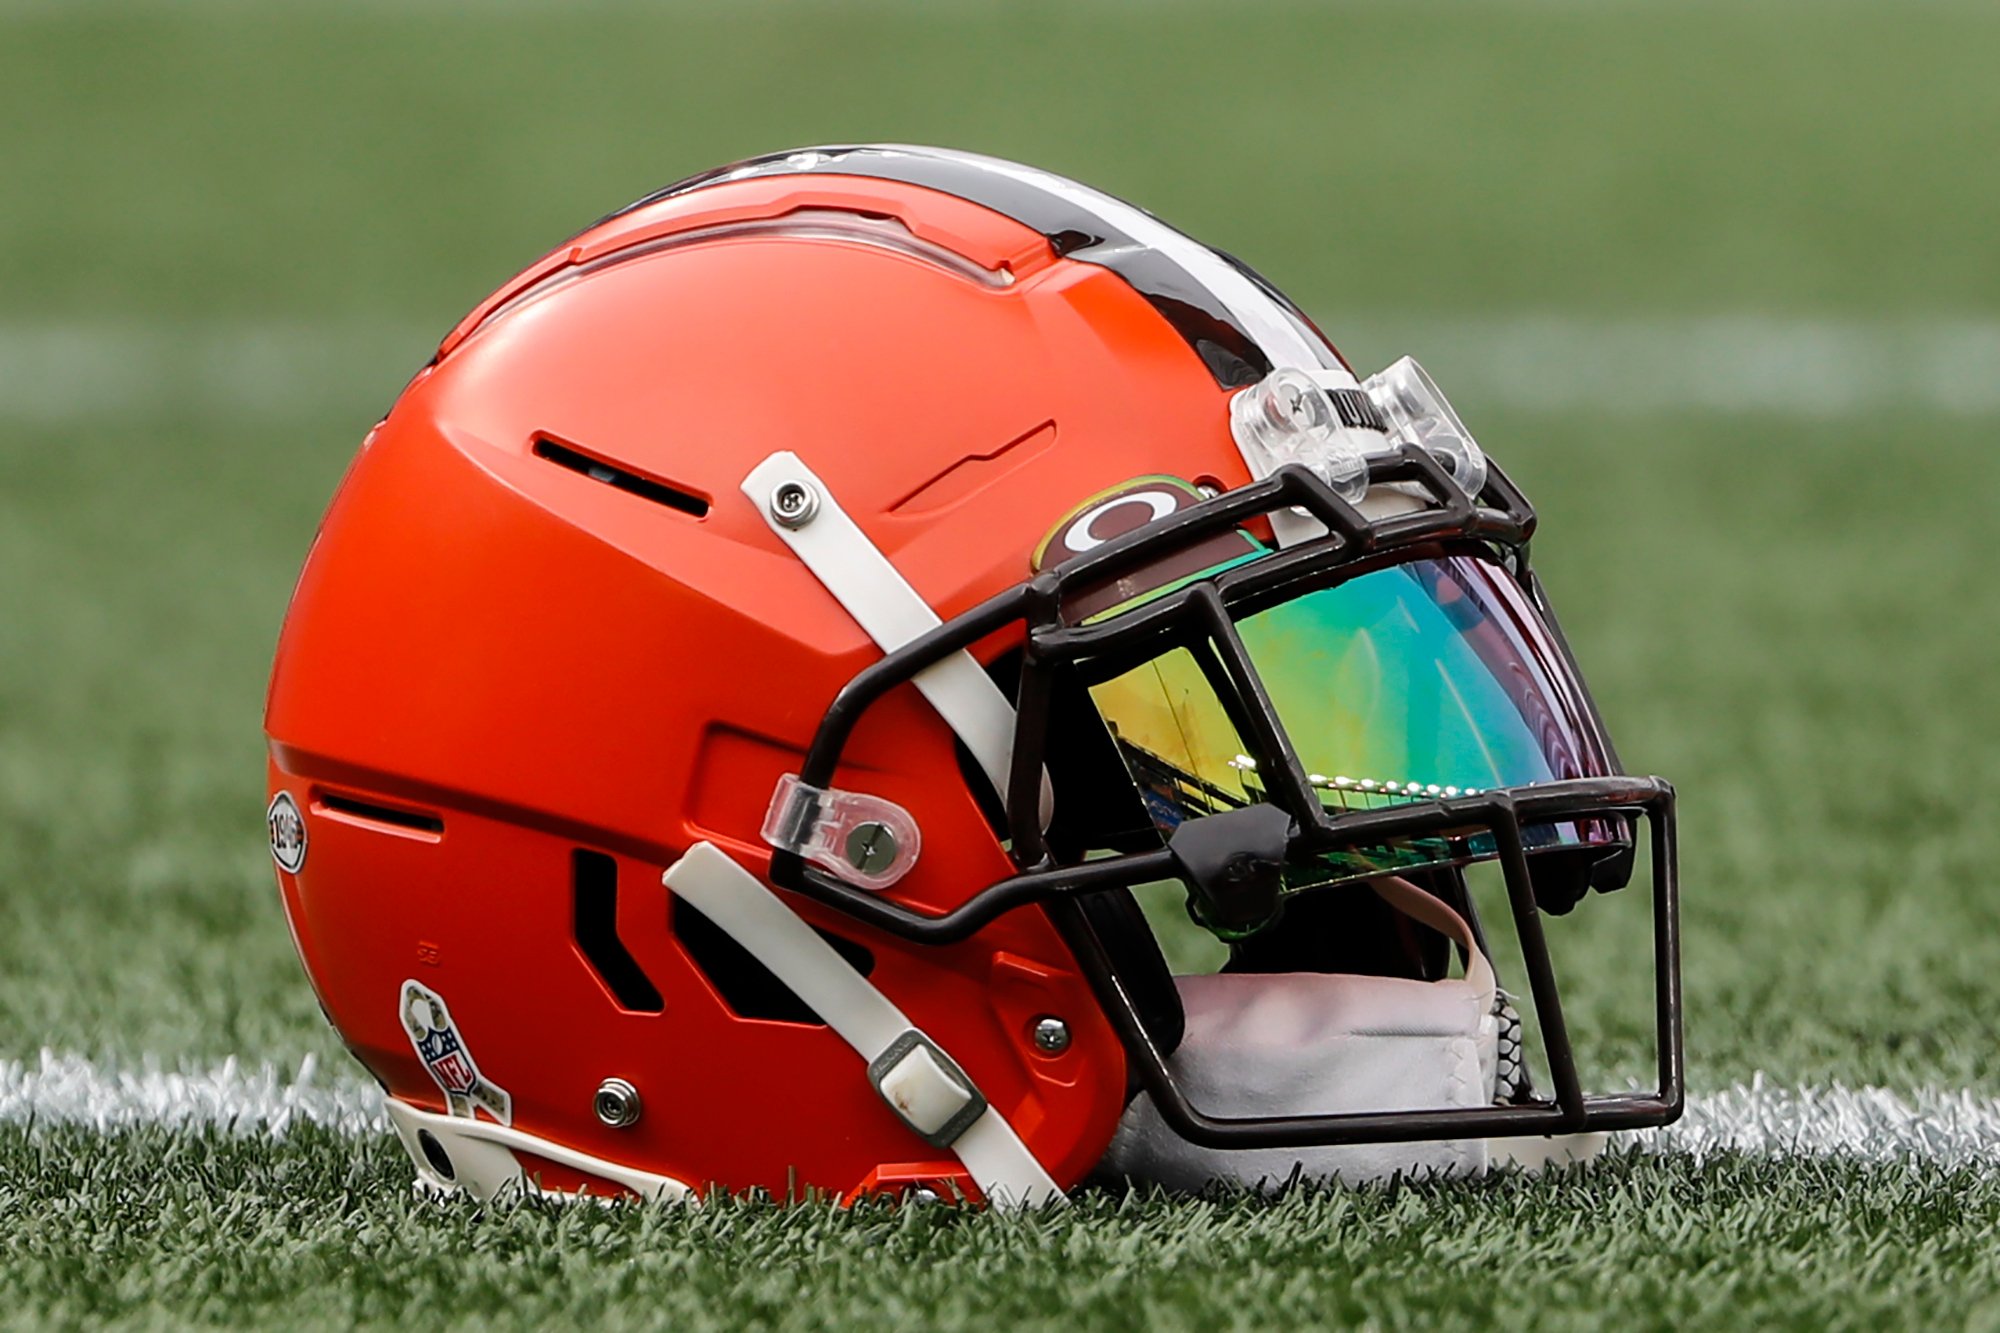 Browns 2022 opponents are set